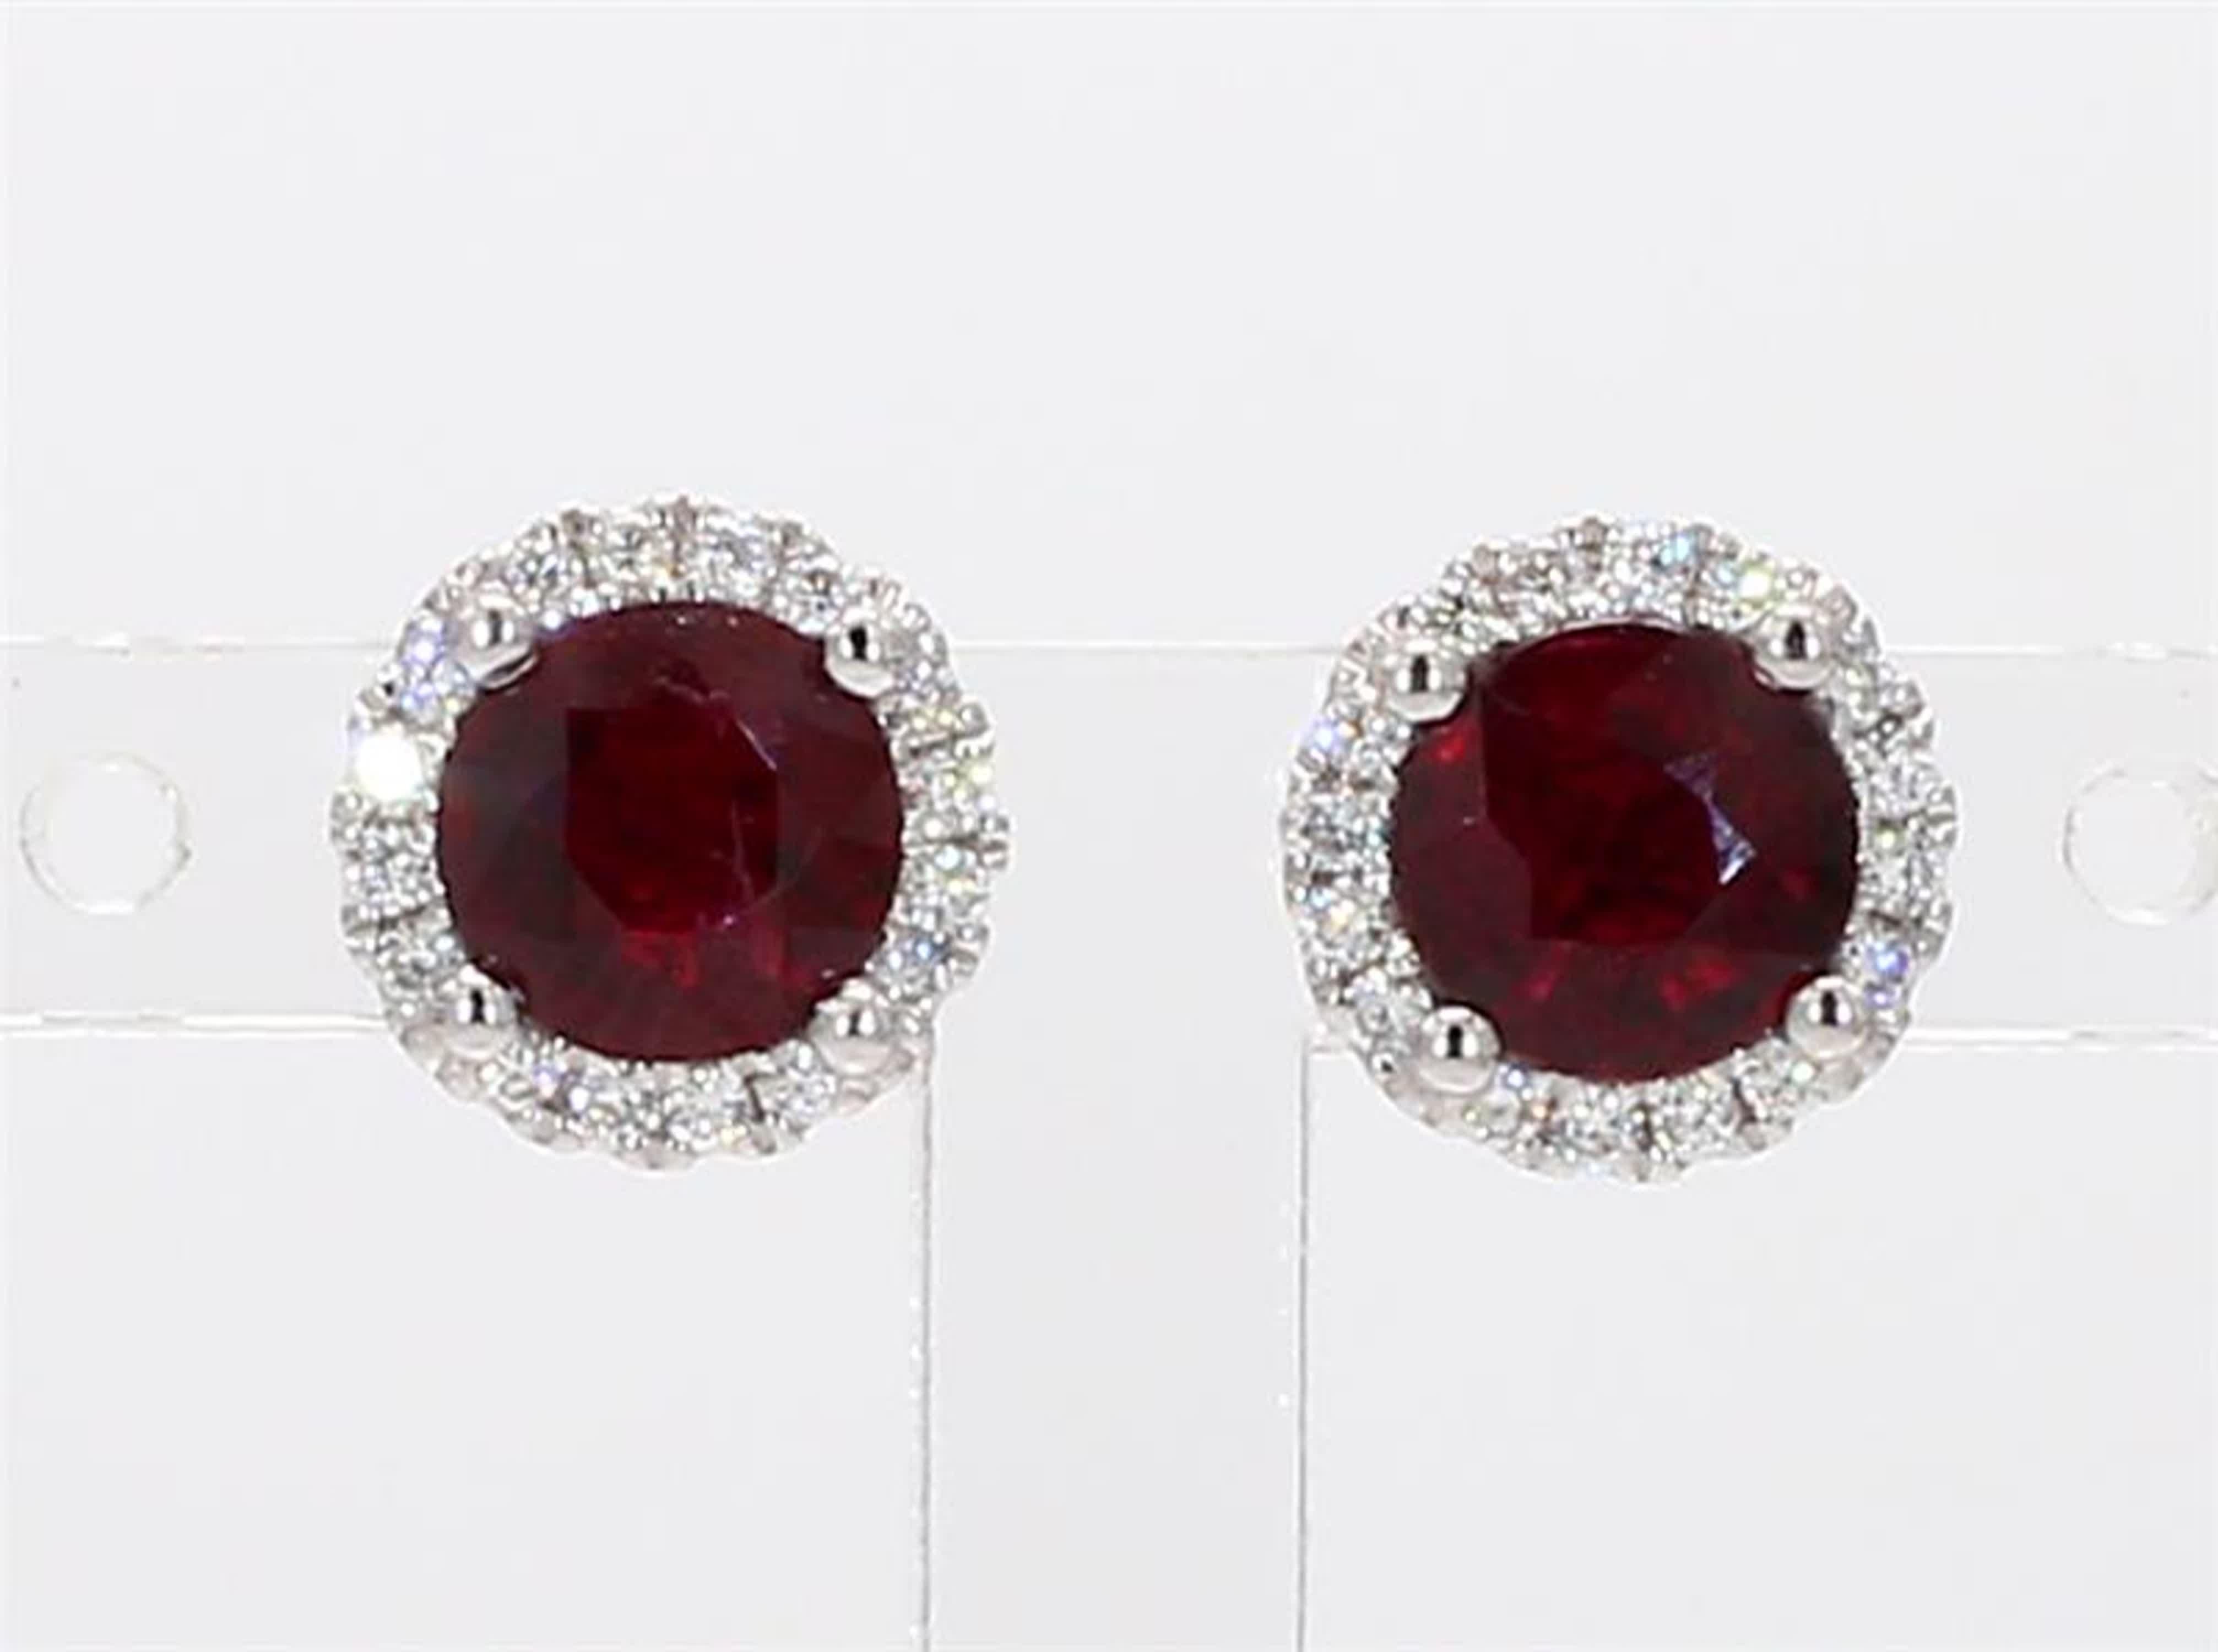 RareGemWorld's classic ruby earrings. Mounted in a beautiful 14K White Gold setting with natural round cut red ruby's. These ruby's are surrounded by a halo of natural round white diamond melee. These earrings are guaranteed to impress and enhance